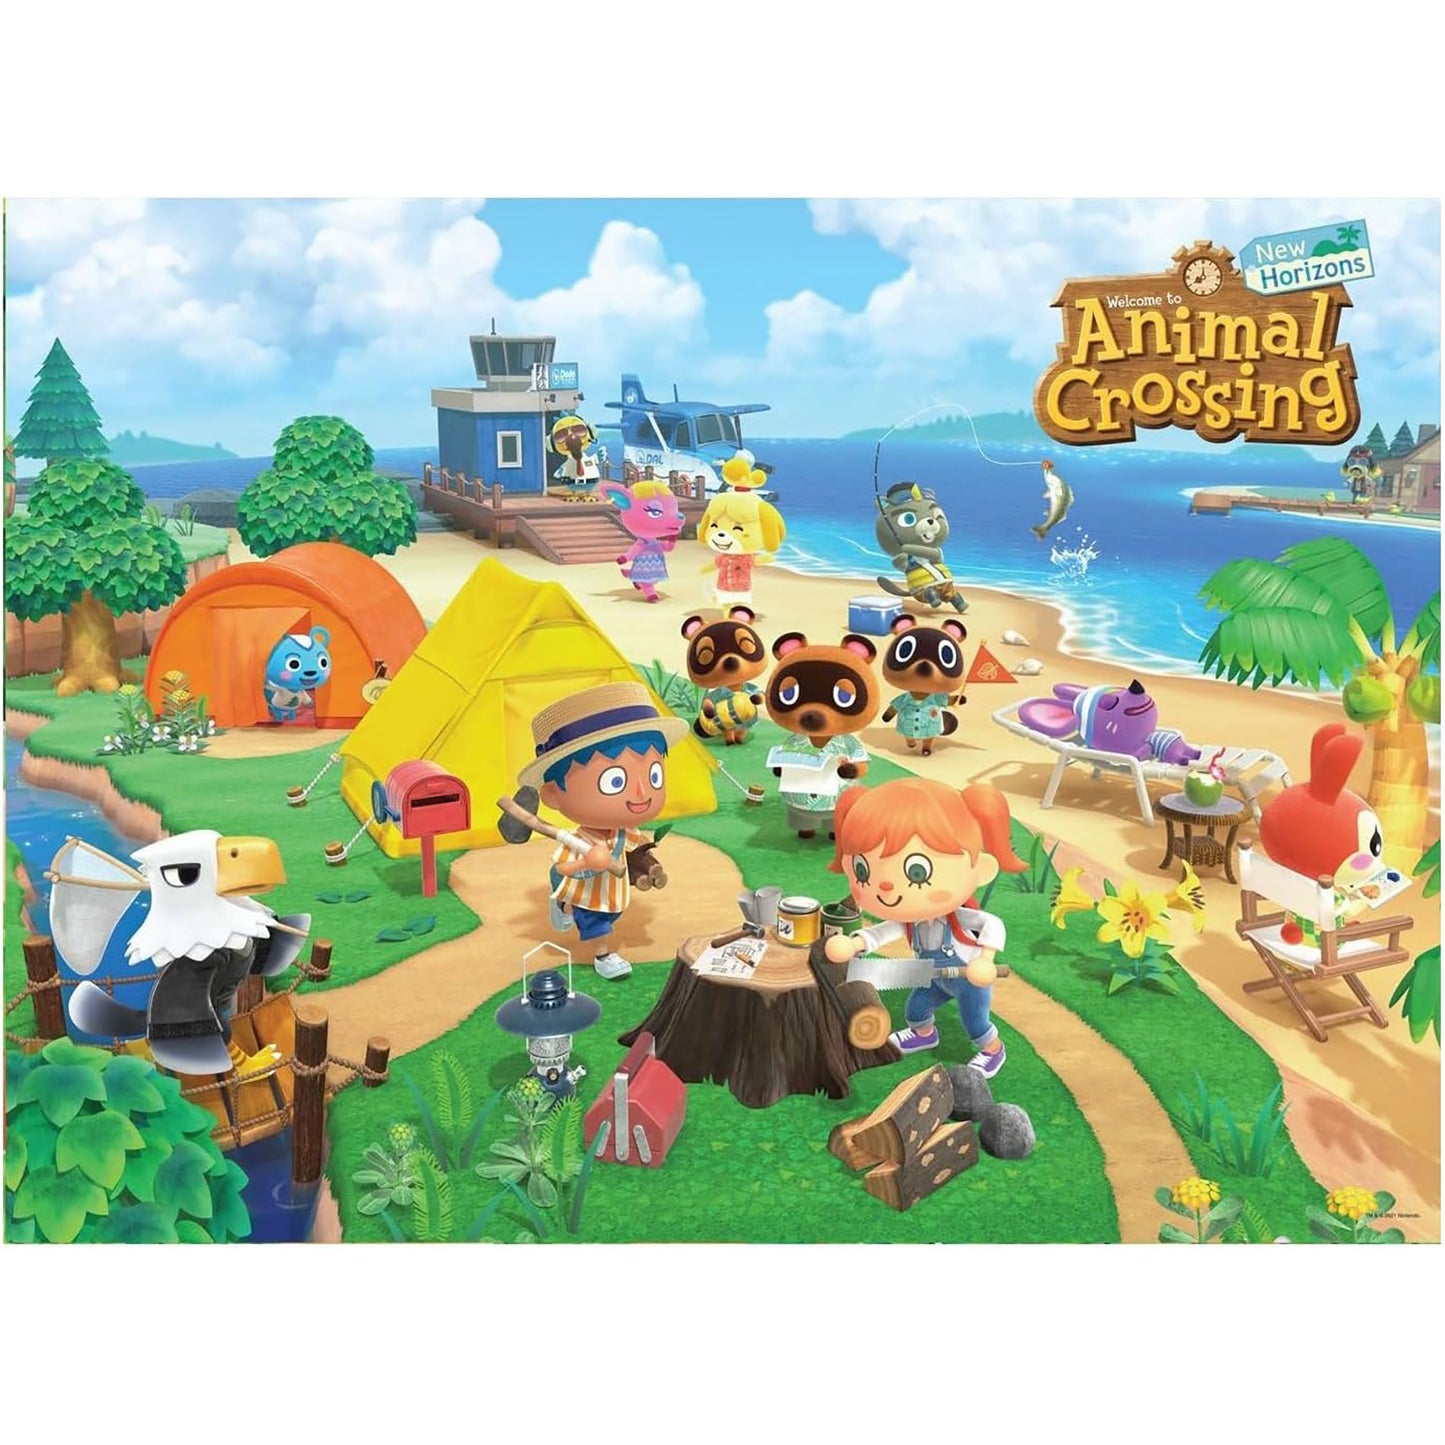 Animal Crossing™: New Horizons "Welcome to Animal Crossing" 1000-Piece Puzzle